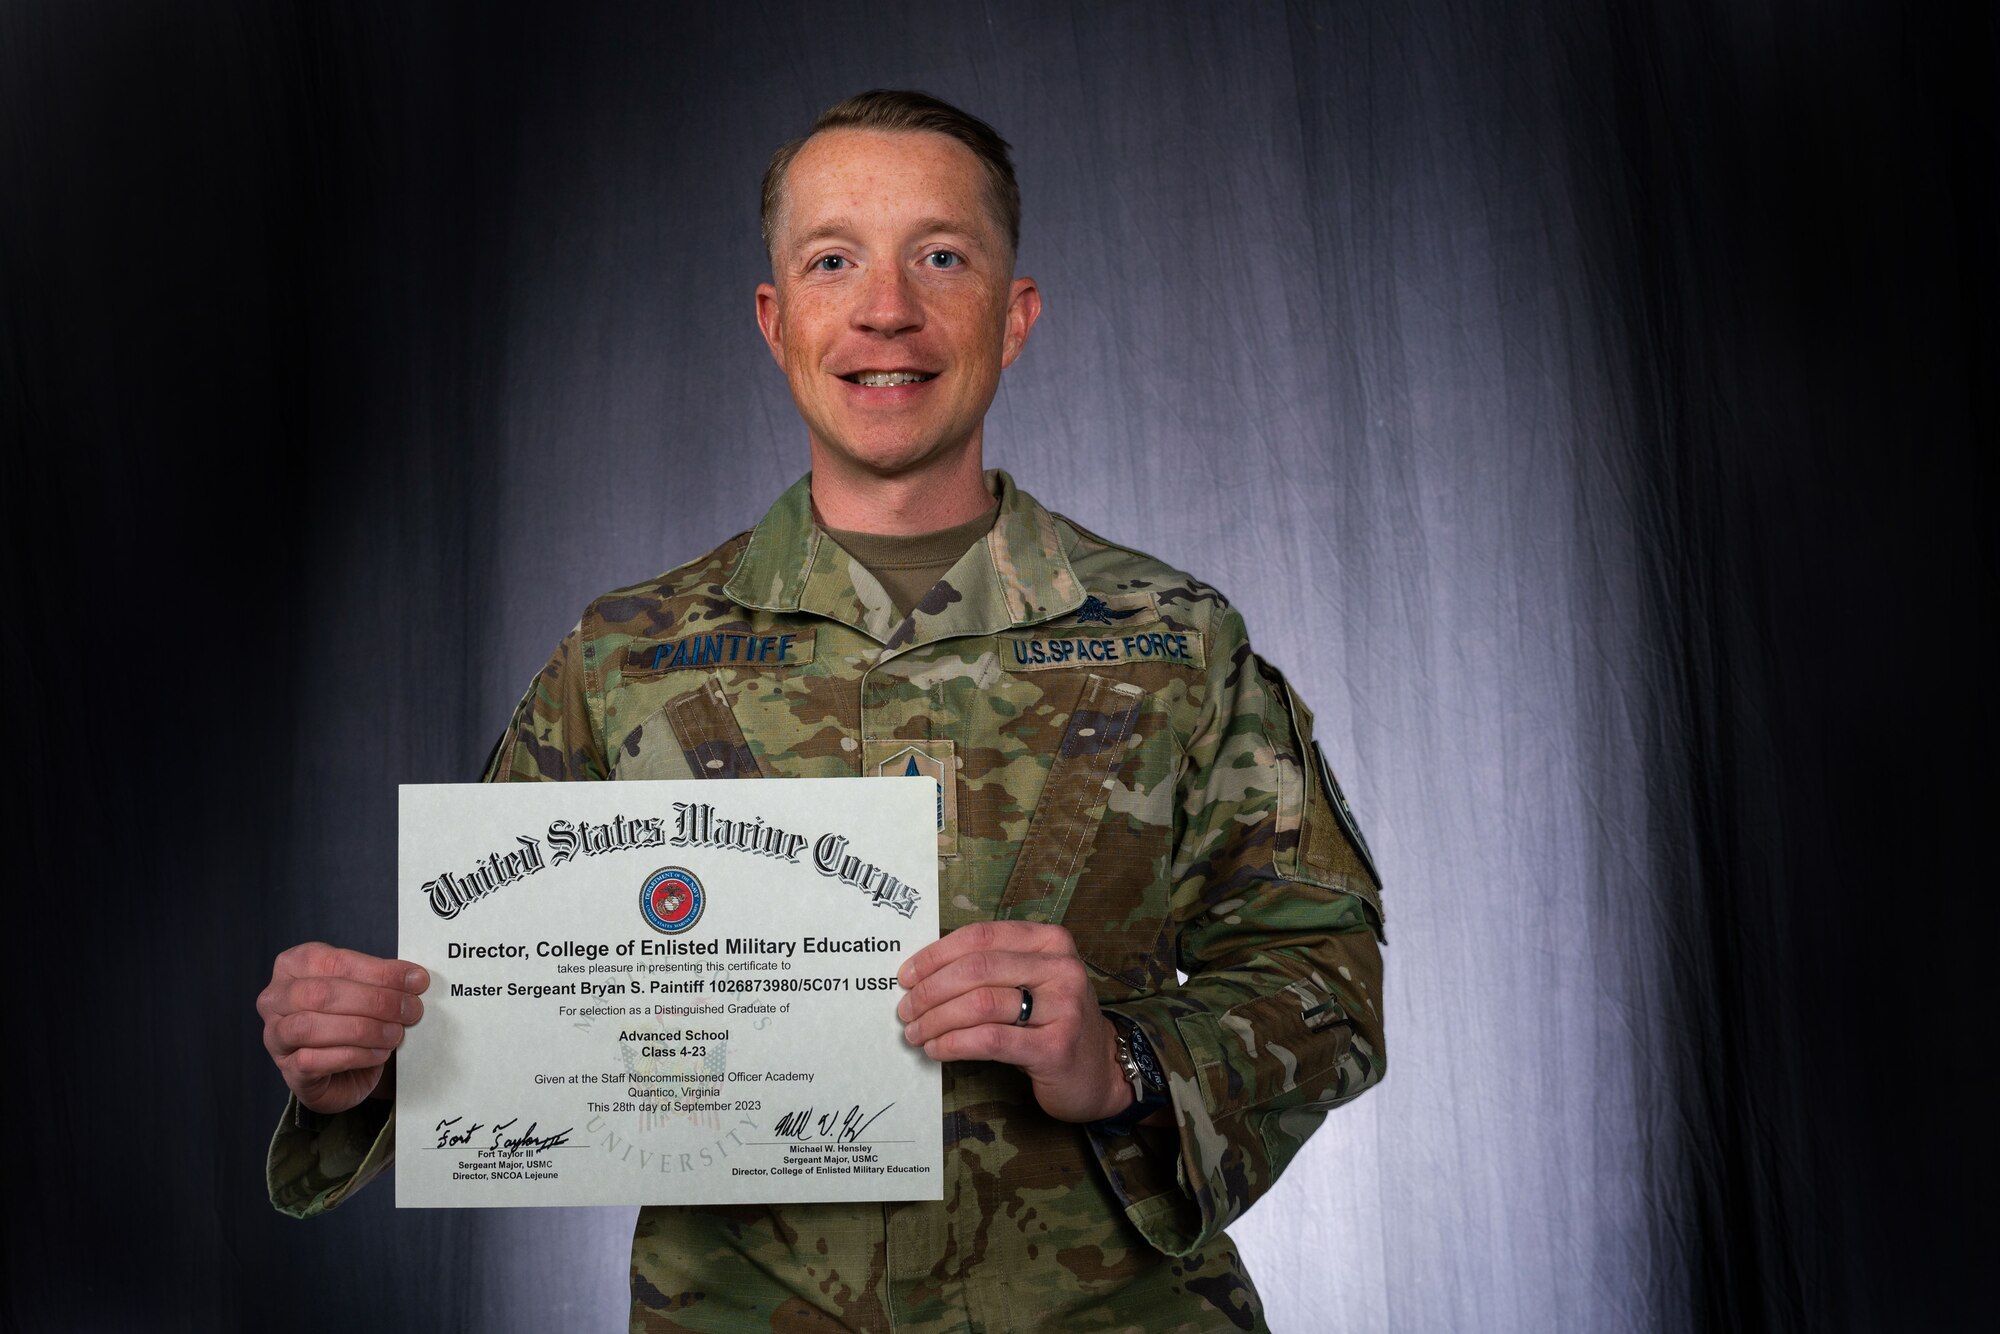 A U.S. Space Force Master Sergeant holds up a certificate for his achievement of winning Distinguished Graduate.